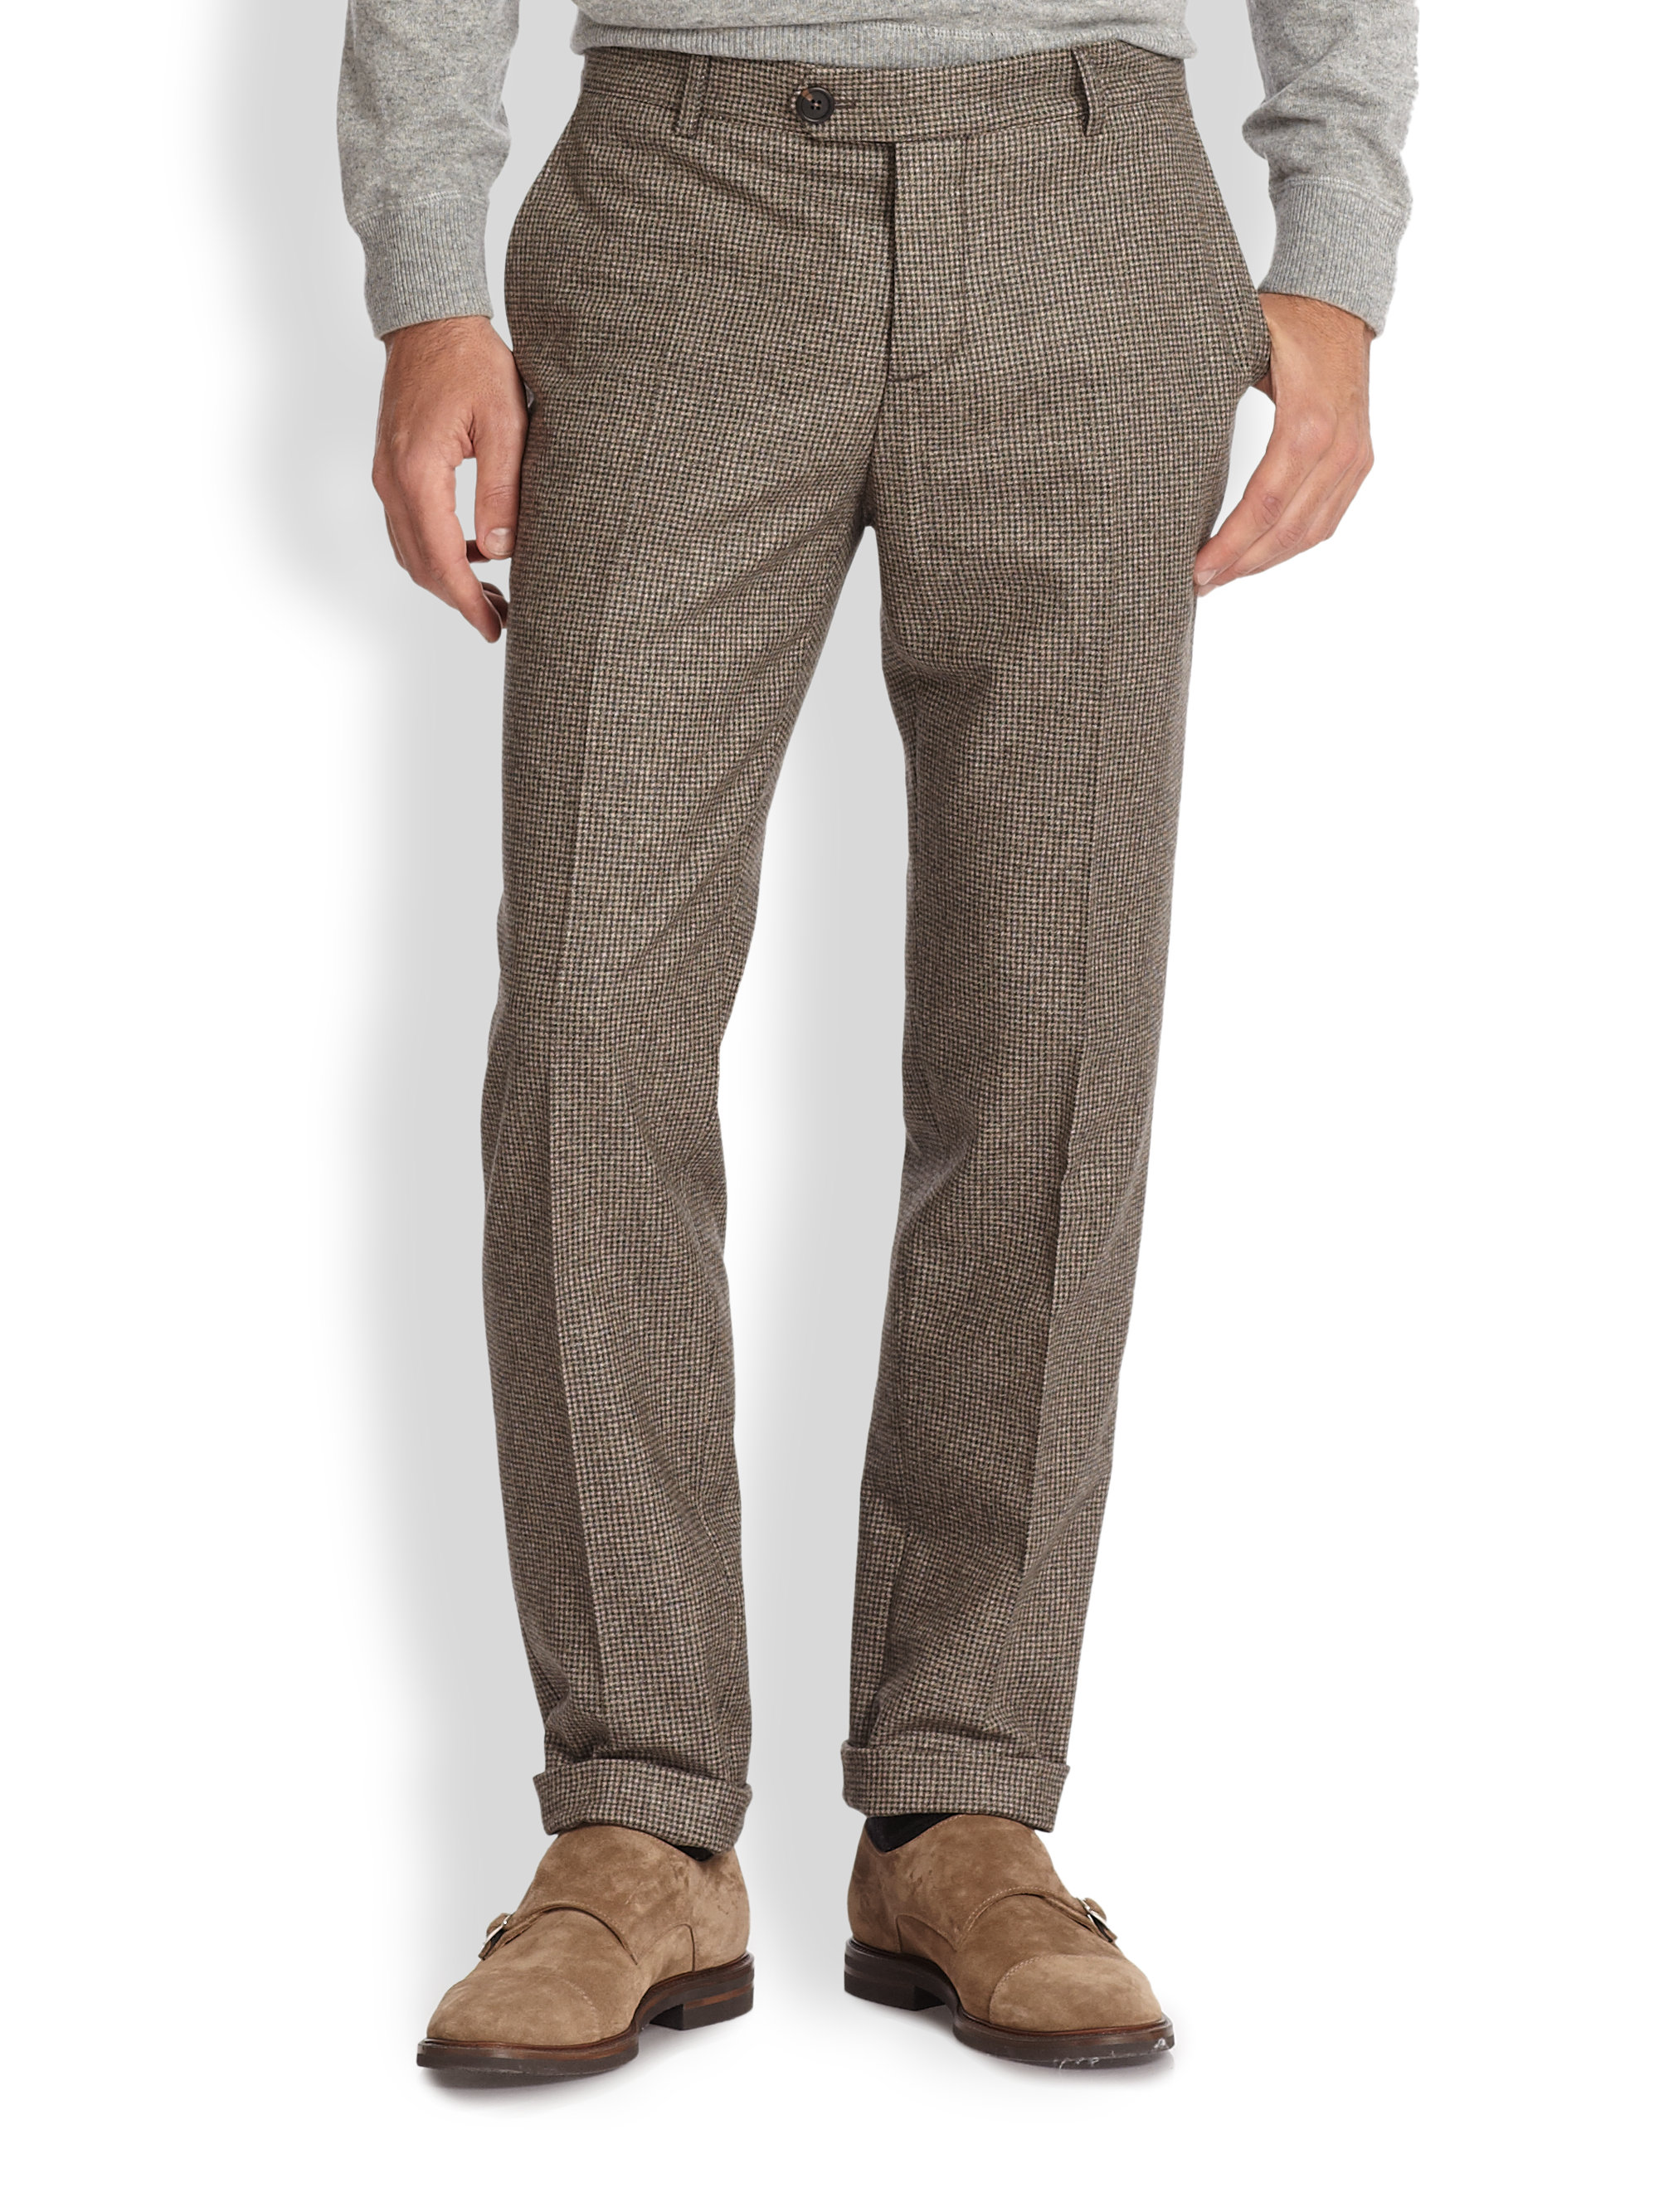 Brunello Cucinelli Houndstooth Wool Pants in Brown for Men - Lyst